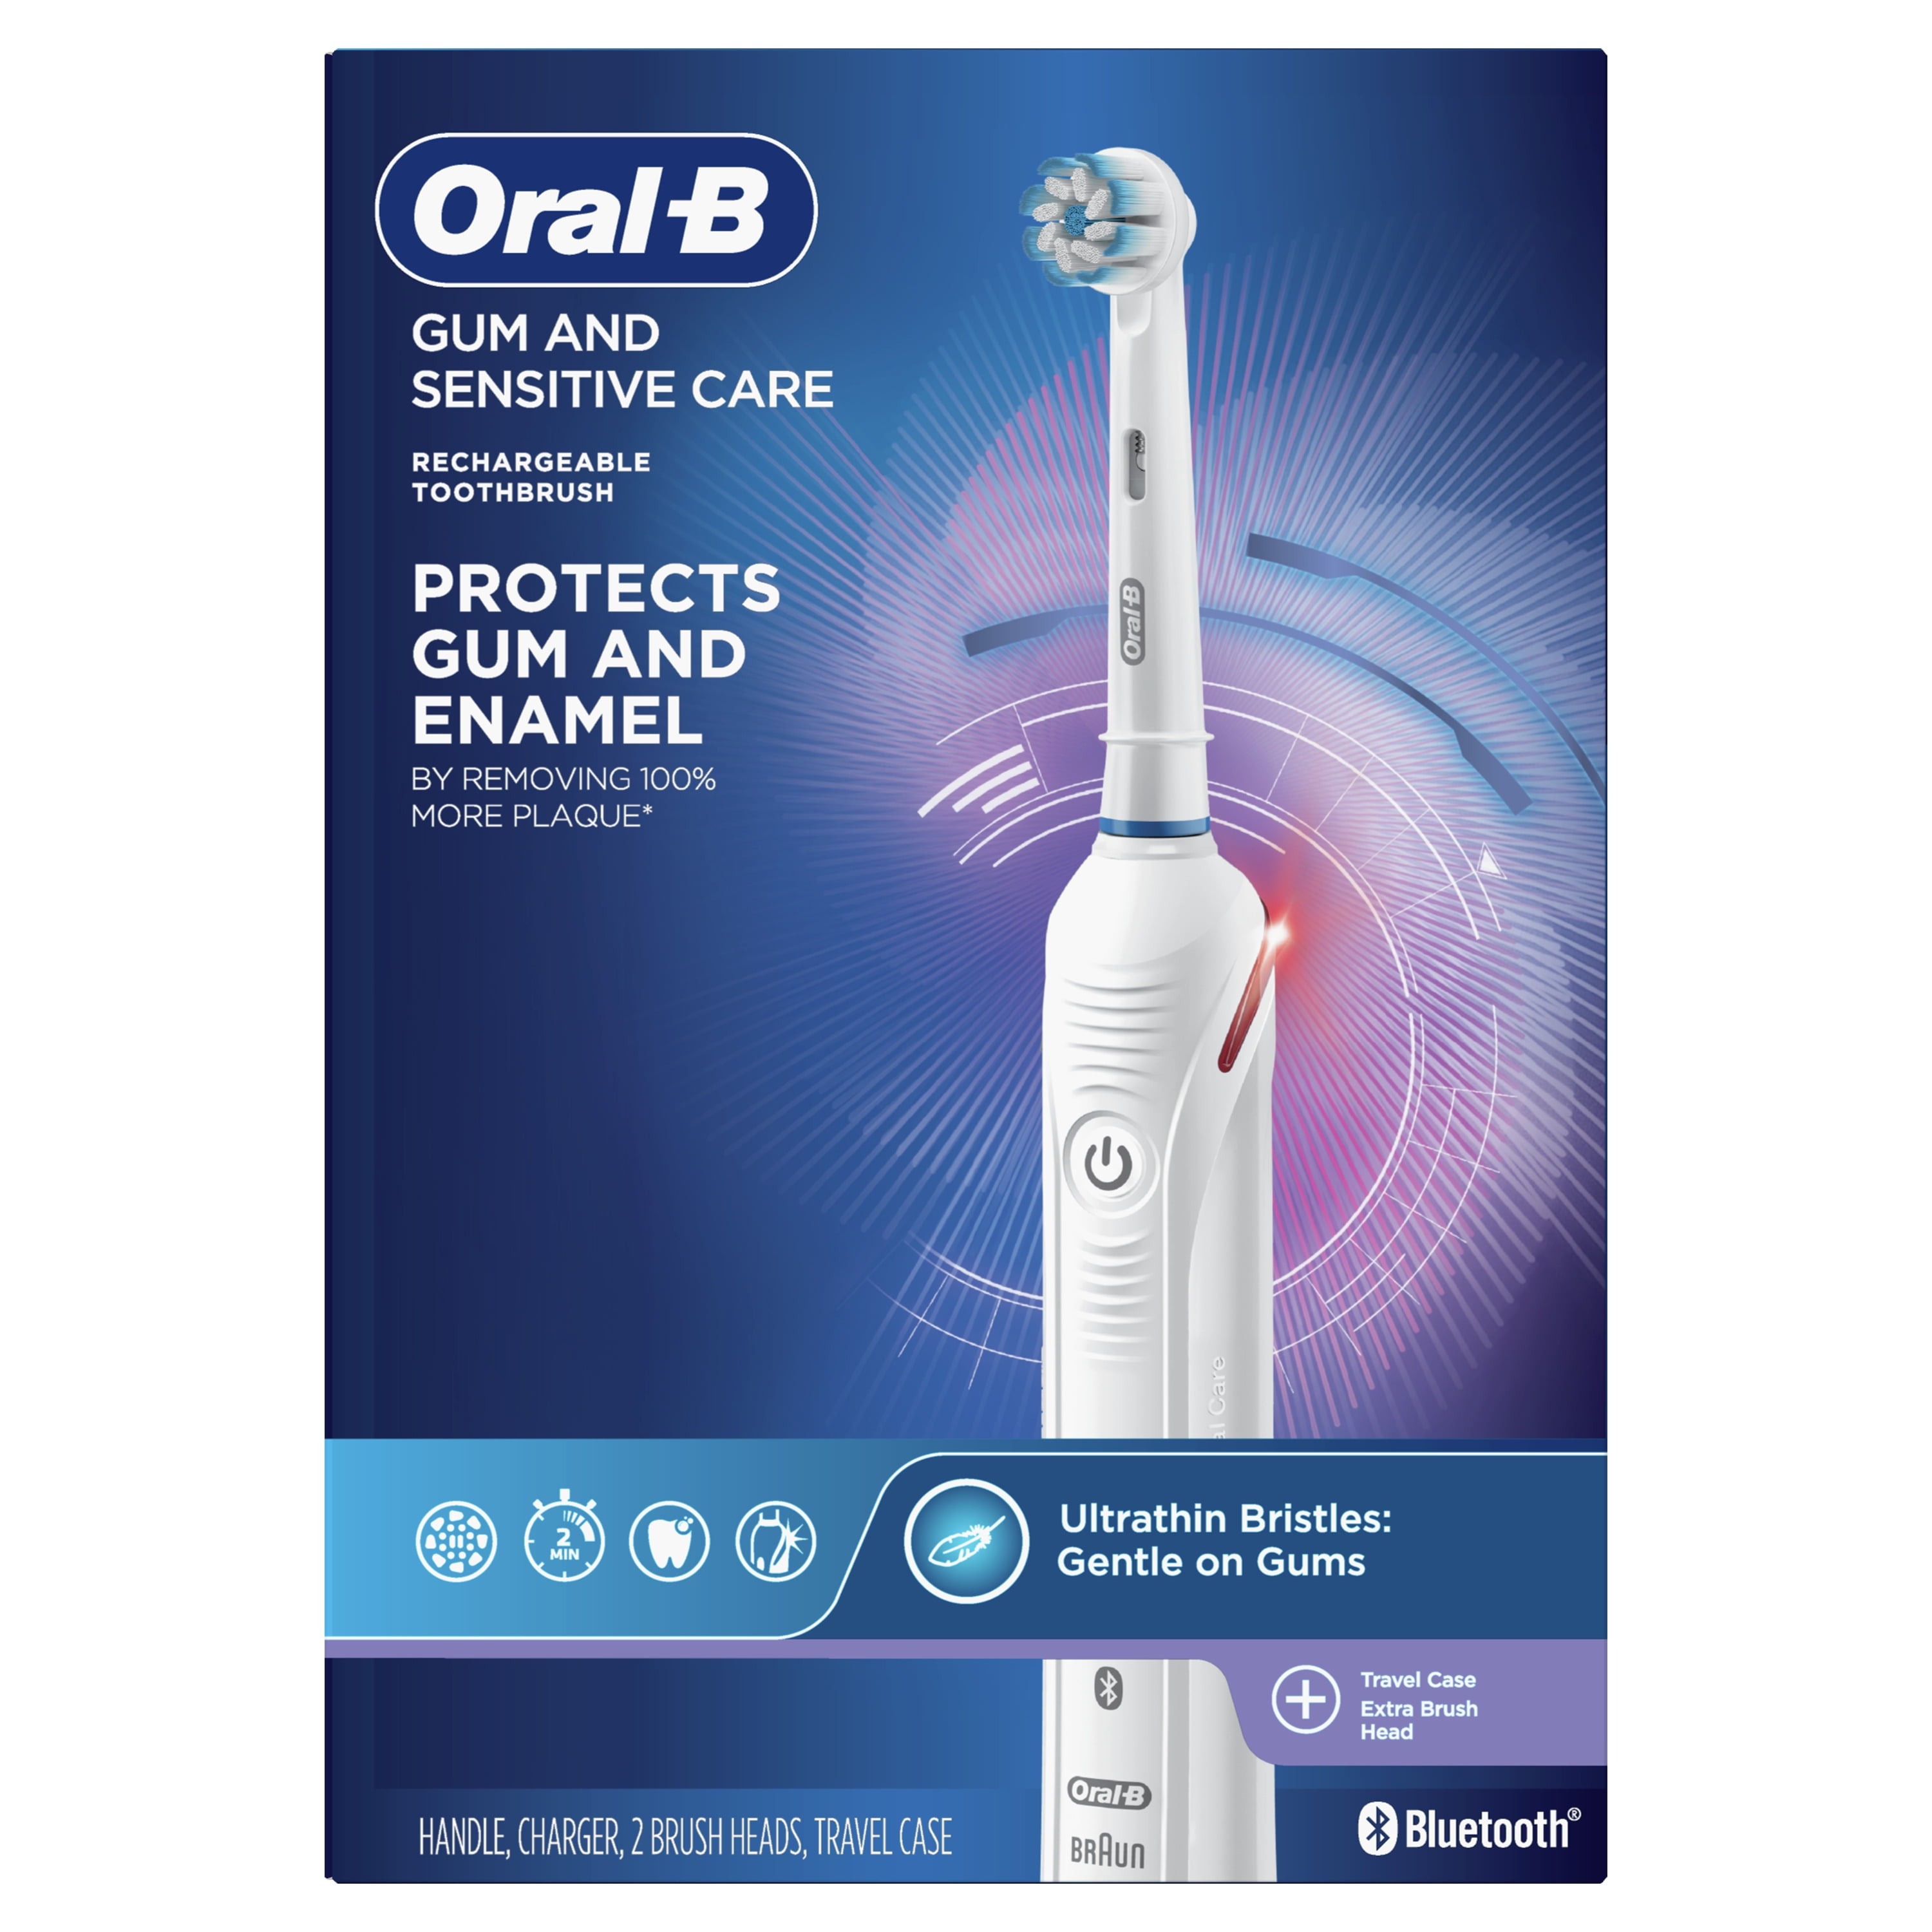 Oral-B Gum and Sensitive Care Rechargeable Electric Walmart.com